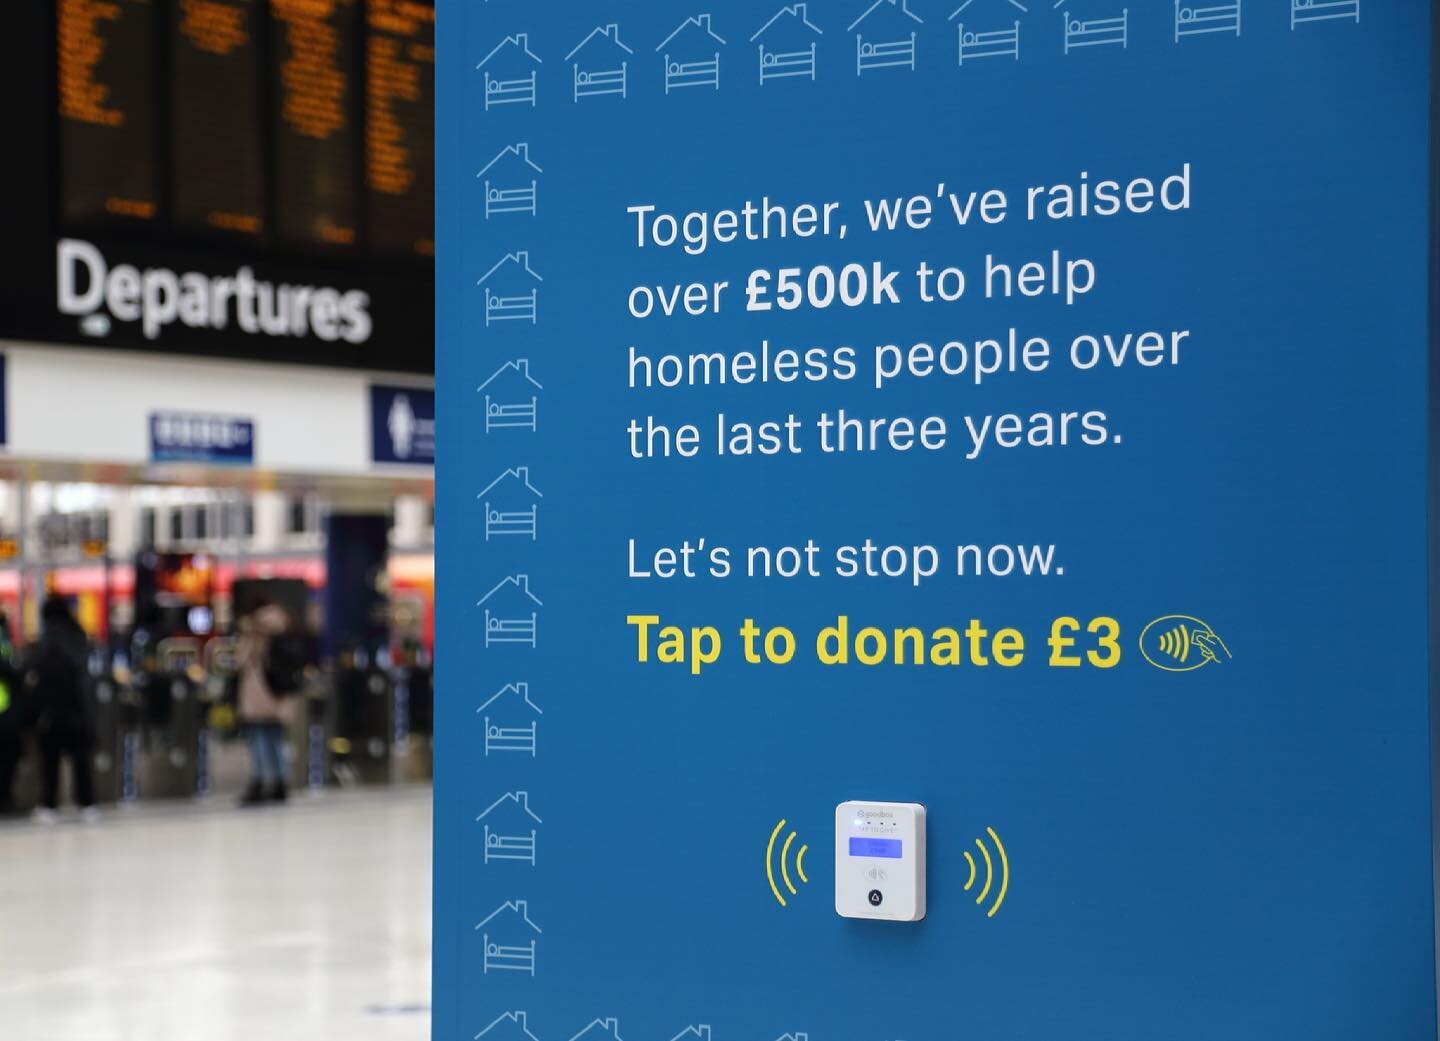 💪 So proud of what we&rsquo;ve achieved together. Over 60,000 Londoners have stopped to make a donation to homelessness since we launched in 2018 &amp; we&rsquo;ve raised over a quarter of a million pounds. 

🦠 Even throughout the pandemic, we&rsqu